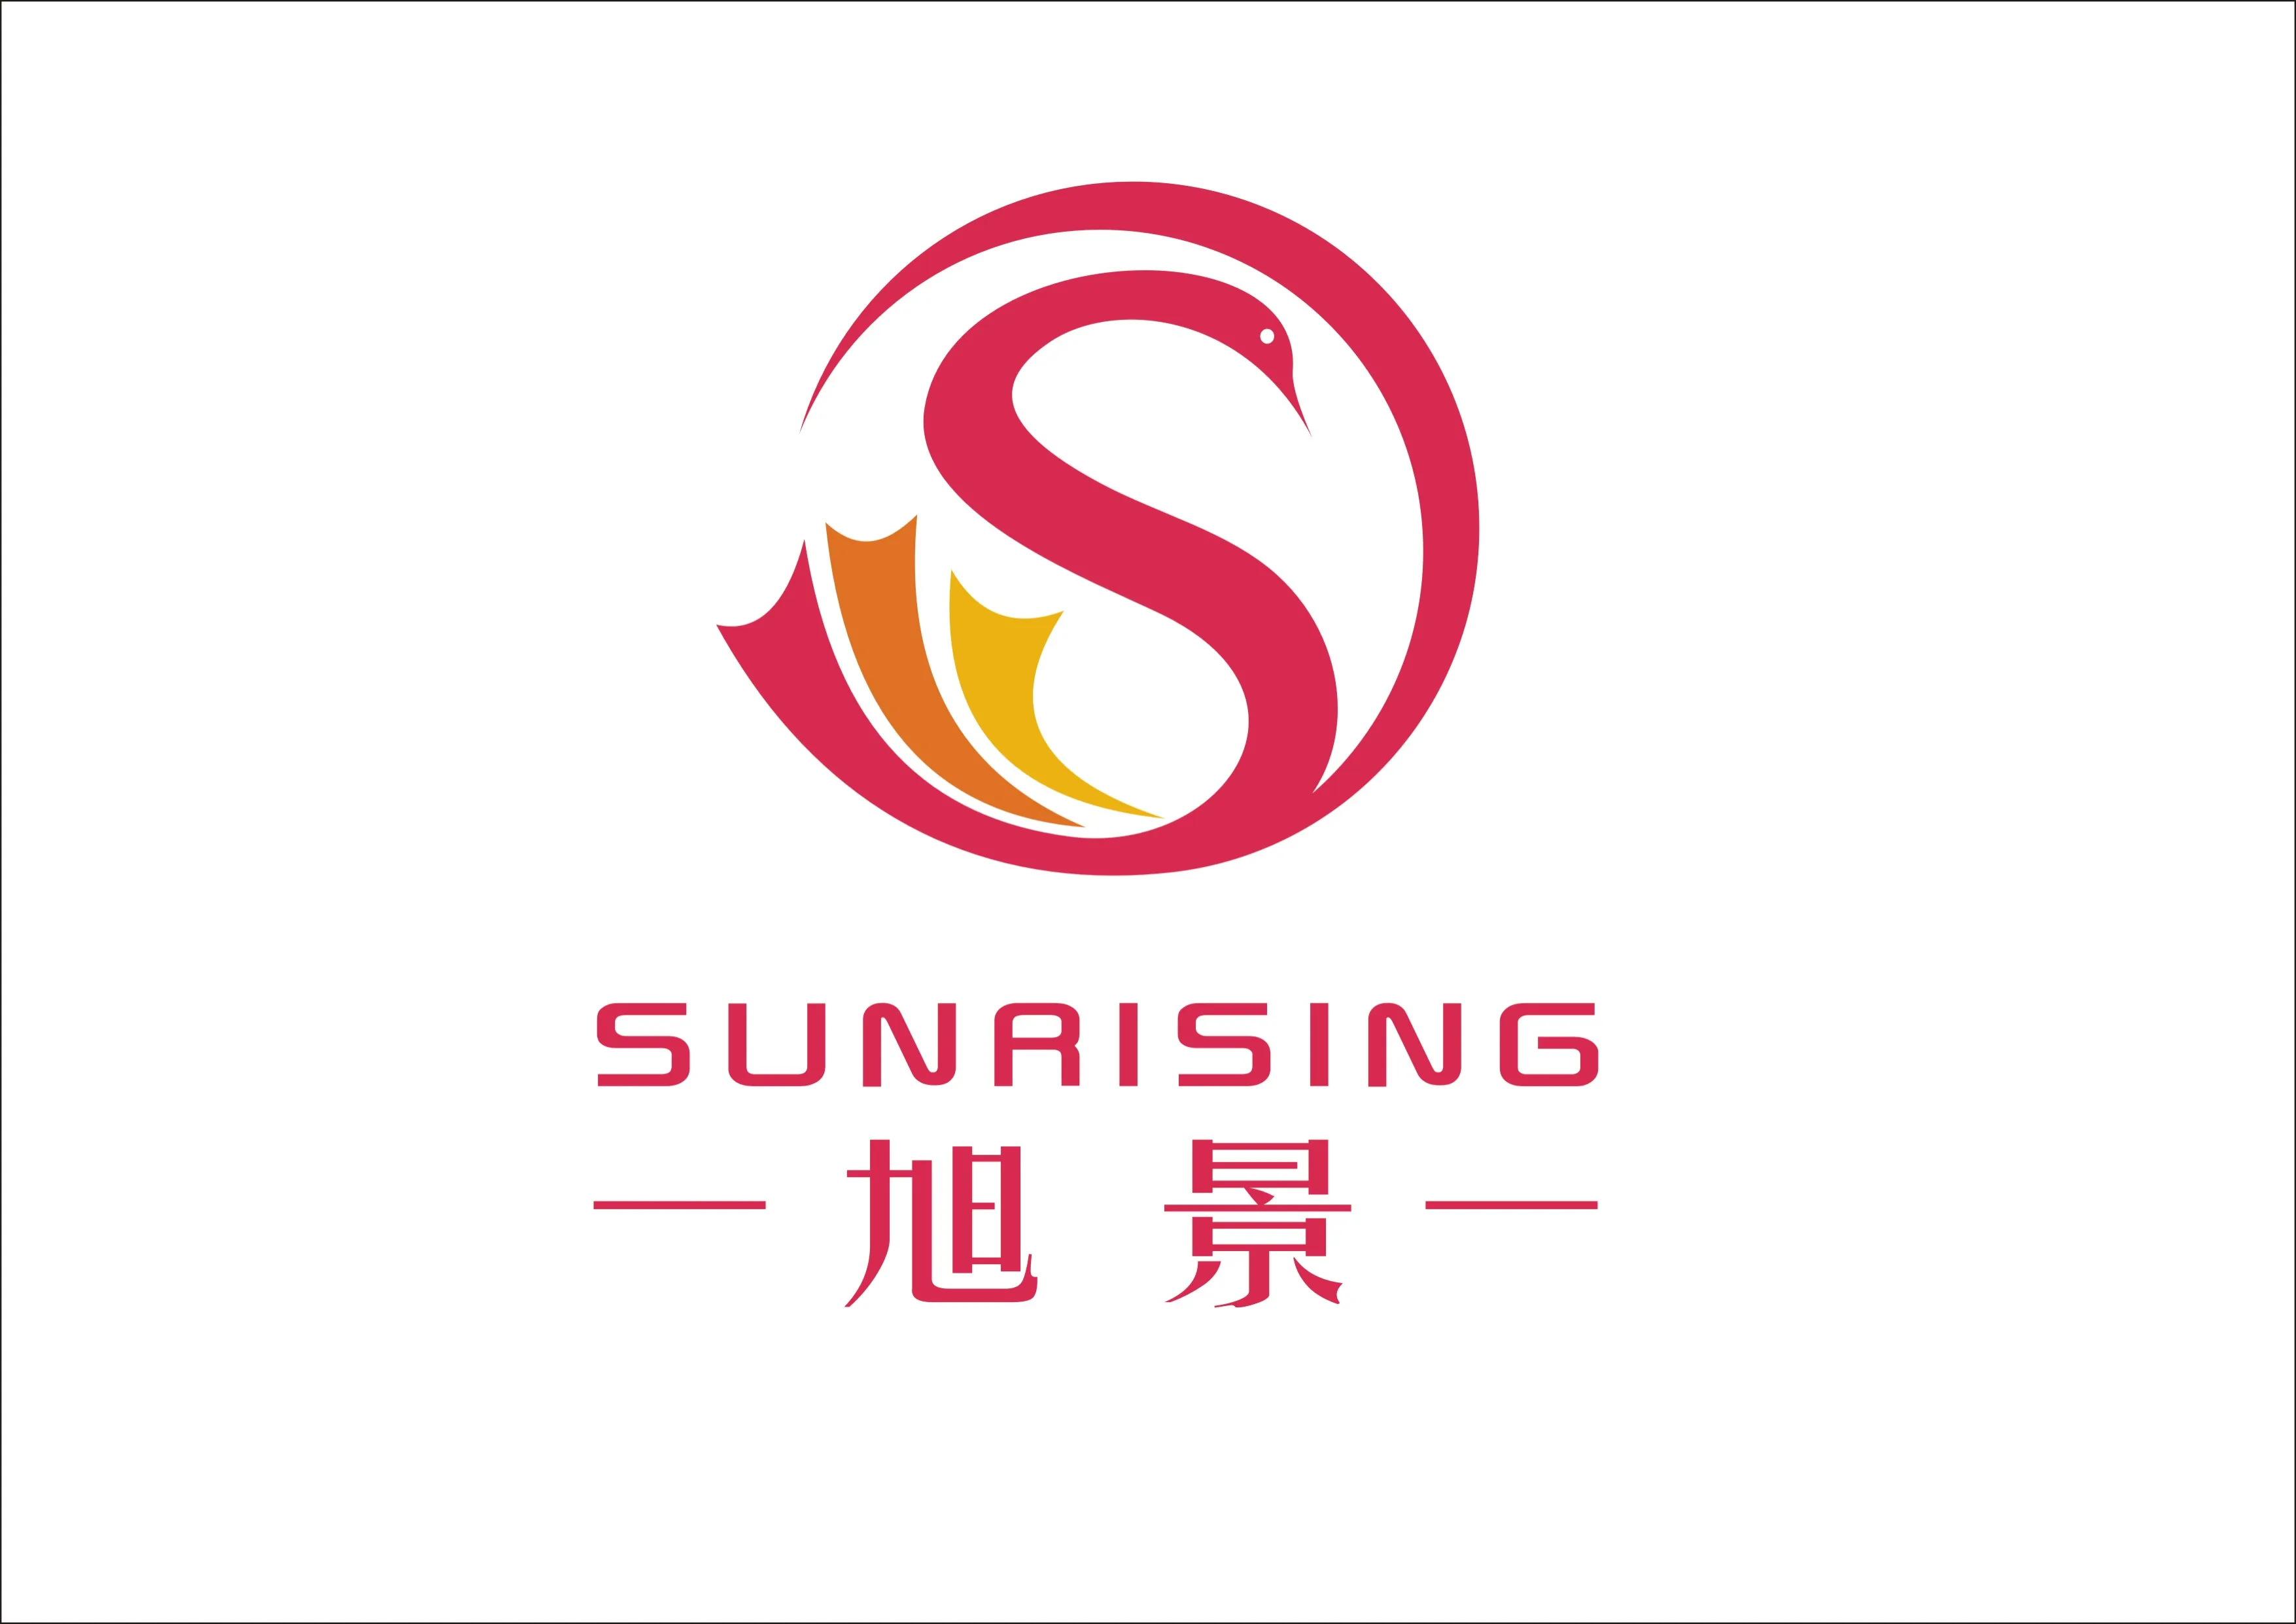 New energy co ltd. Guangdong CVATOP New Energy Technology co.,Ltd. Energy Technology co., Ltd.. Hebei Zhongshuo Textile Manufacturing co Ltd. Shandong Auyan New Energy Technology co., Ltd.